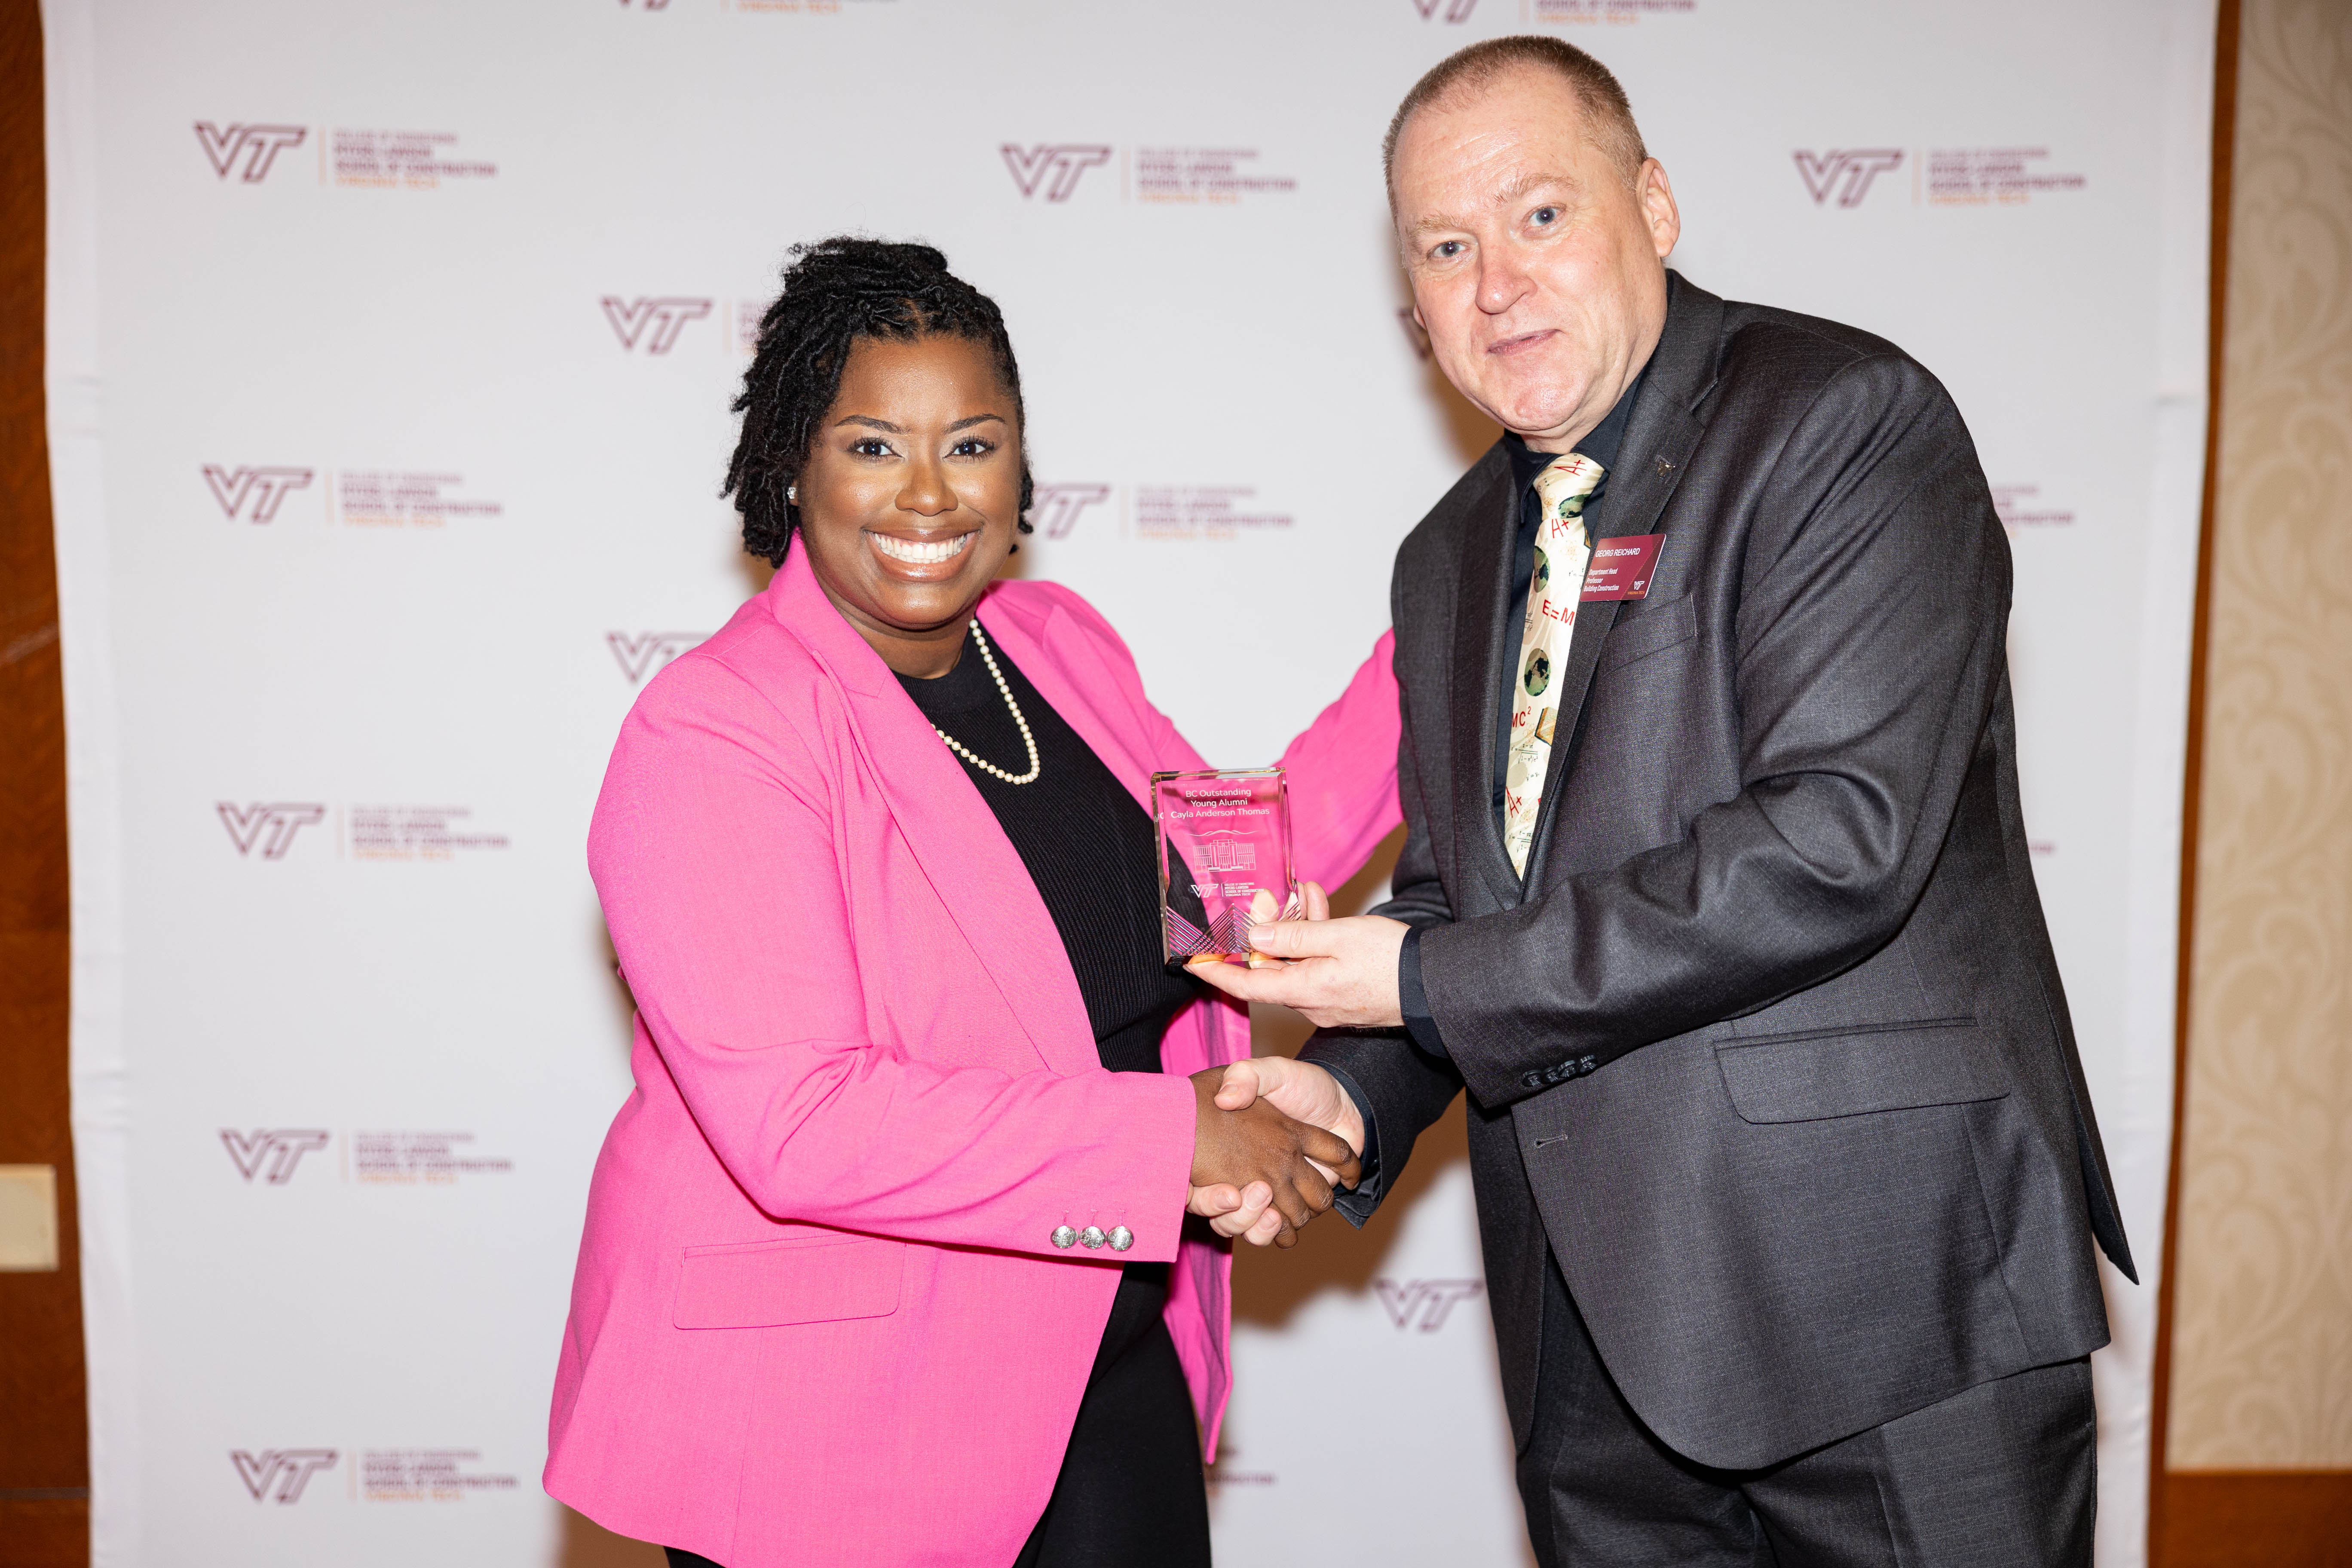 Cayla Thomas '16 (at left) and Georg Richard. Photo by Will Drew for Virginia Tech.